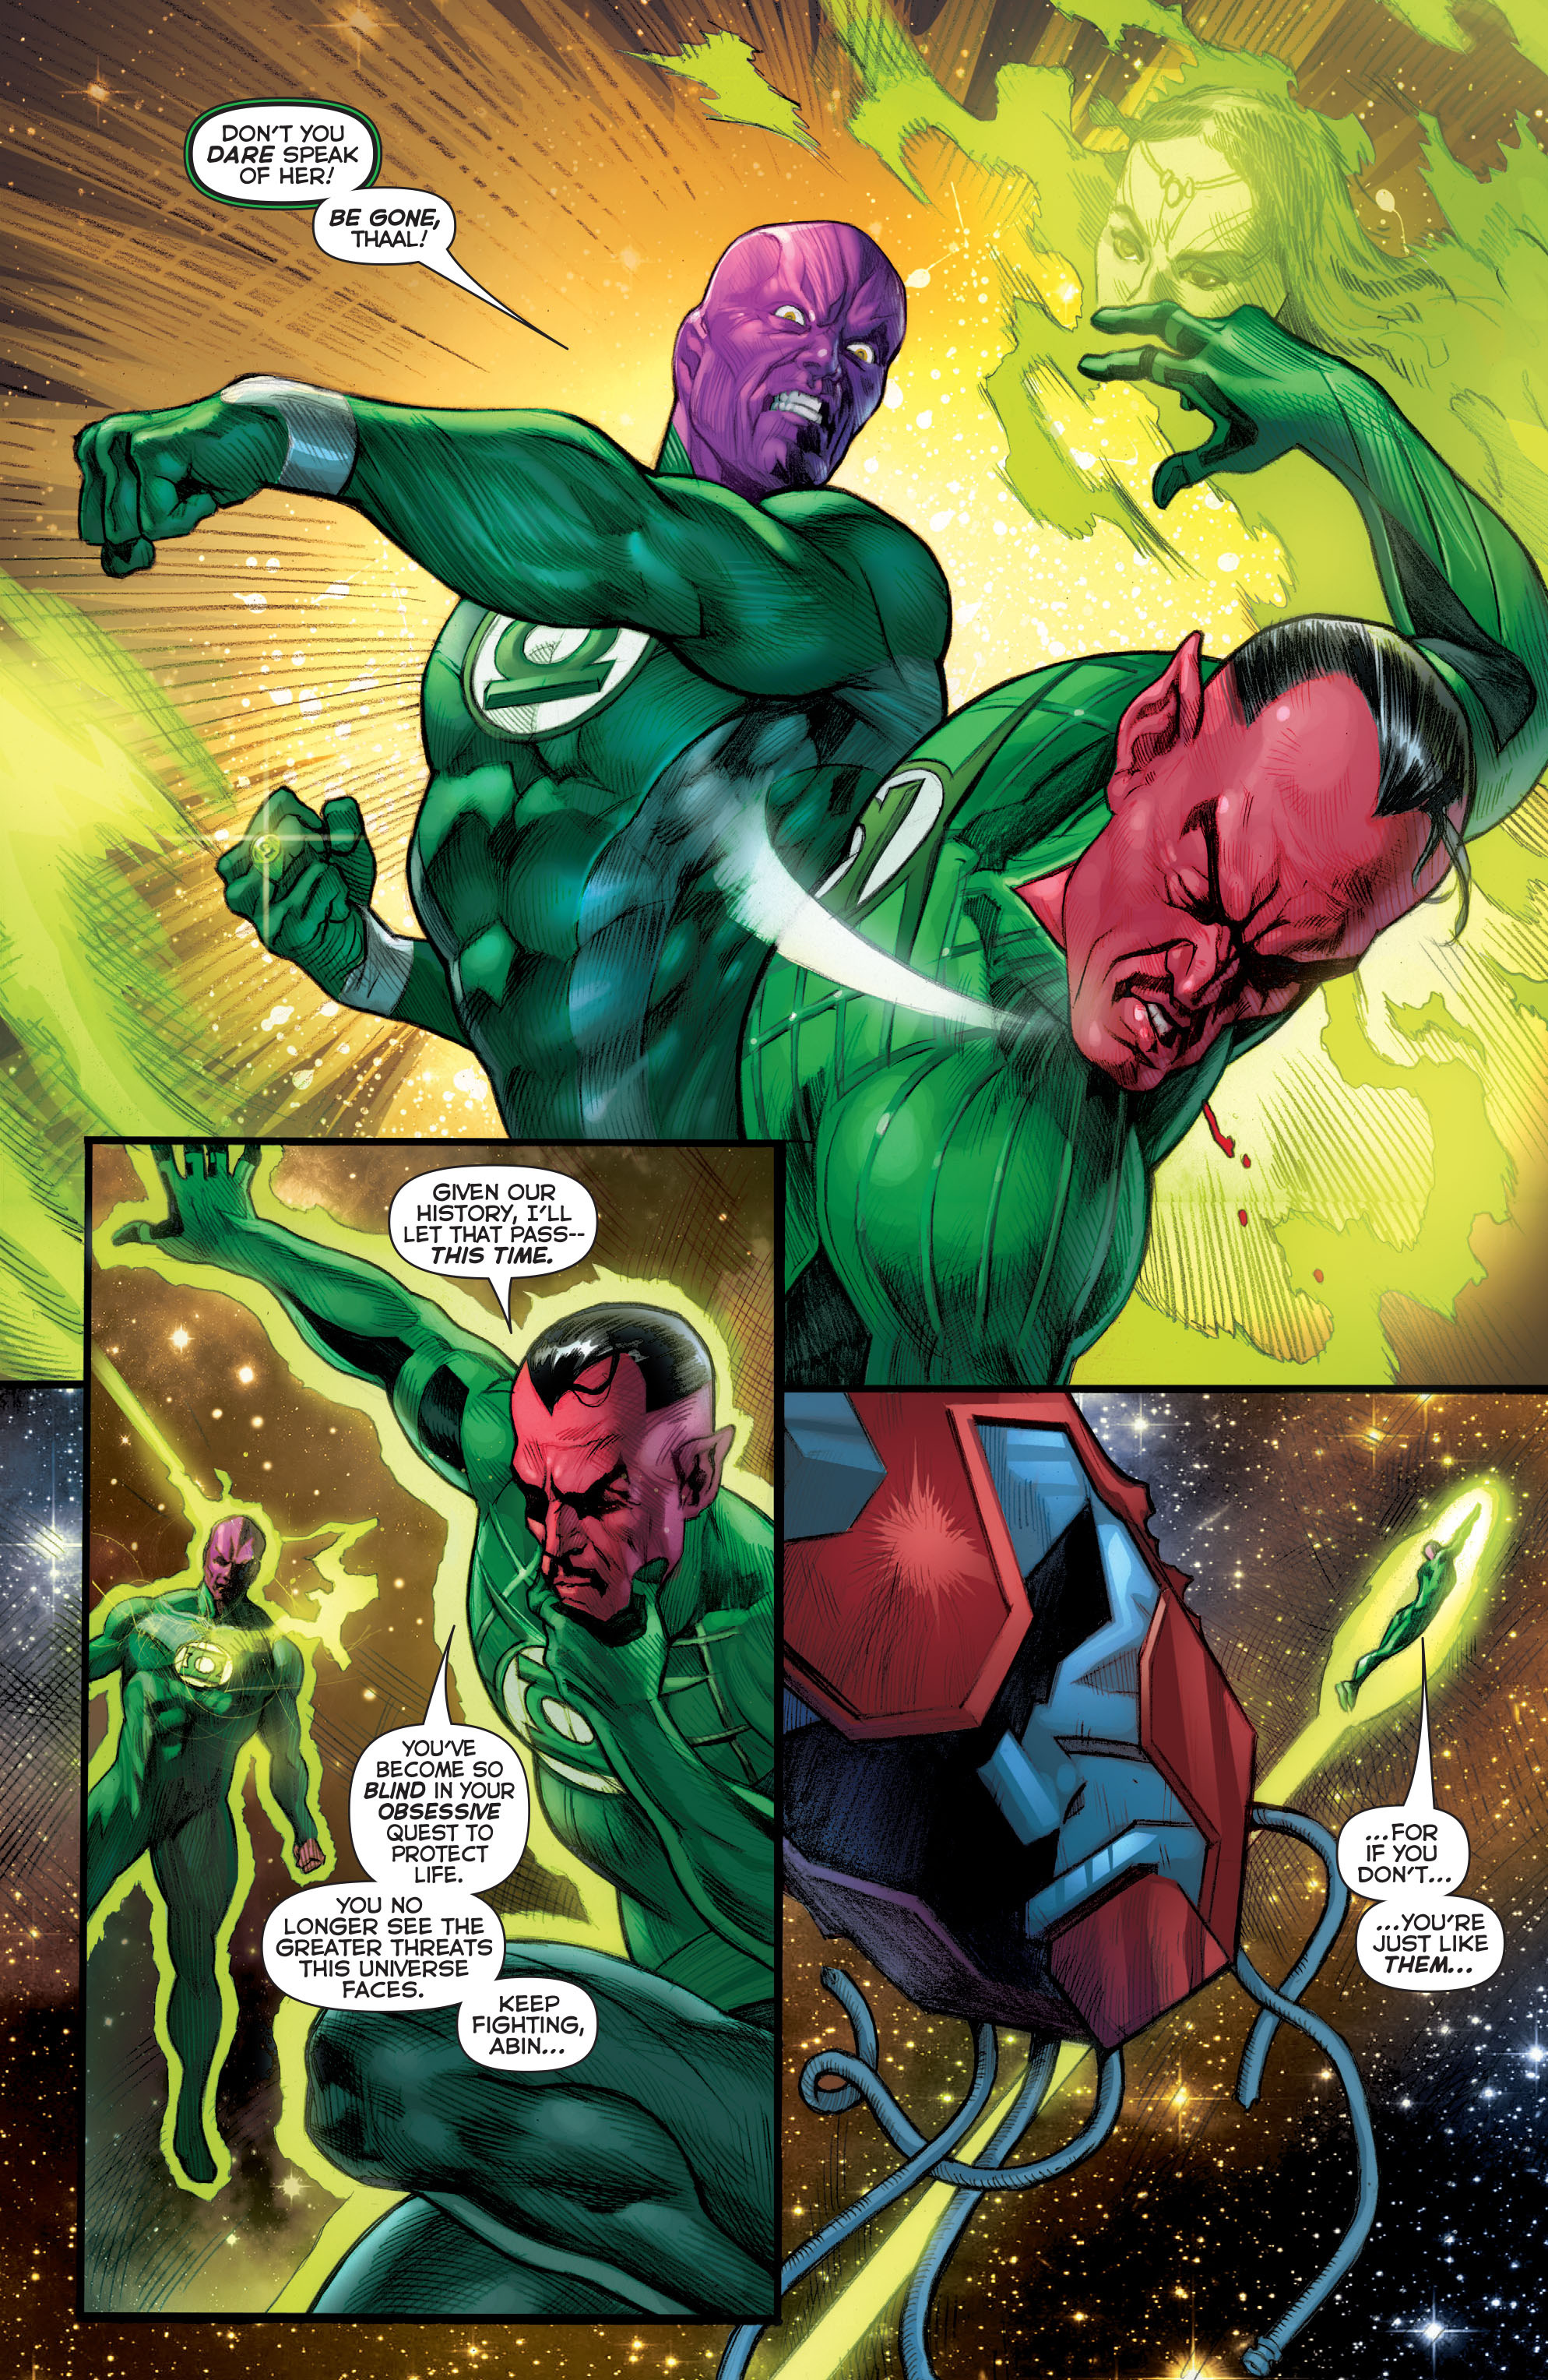 Flashpoint: The World of Flashpoint Featuring Green Lantern Full #1 - English 15